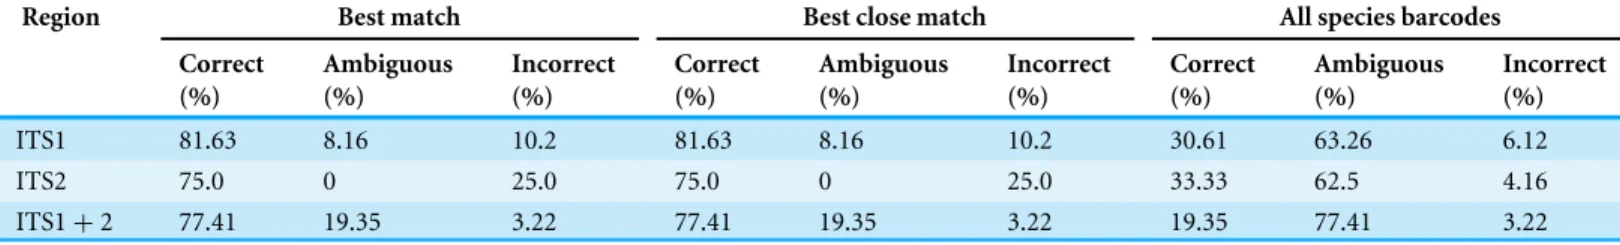 Table 4 Identification success rates based on analysis of the ‘Best match,’ ‘Best close match’ and ‘All species barcodes’ function of TaxonDNA software for each ITS dataset.